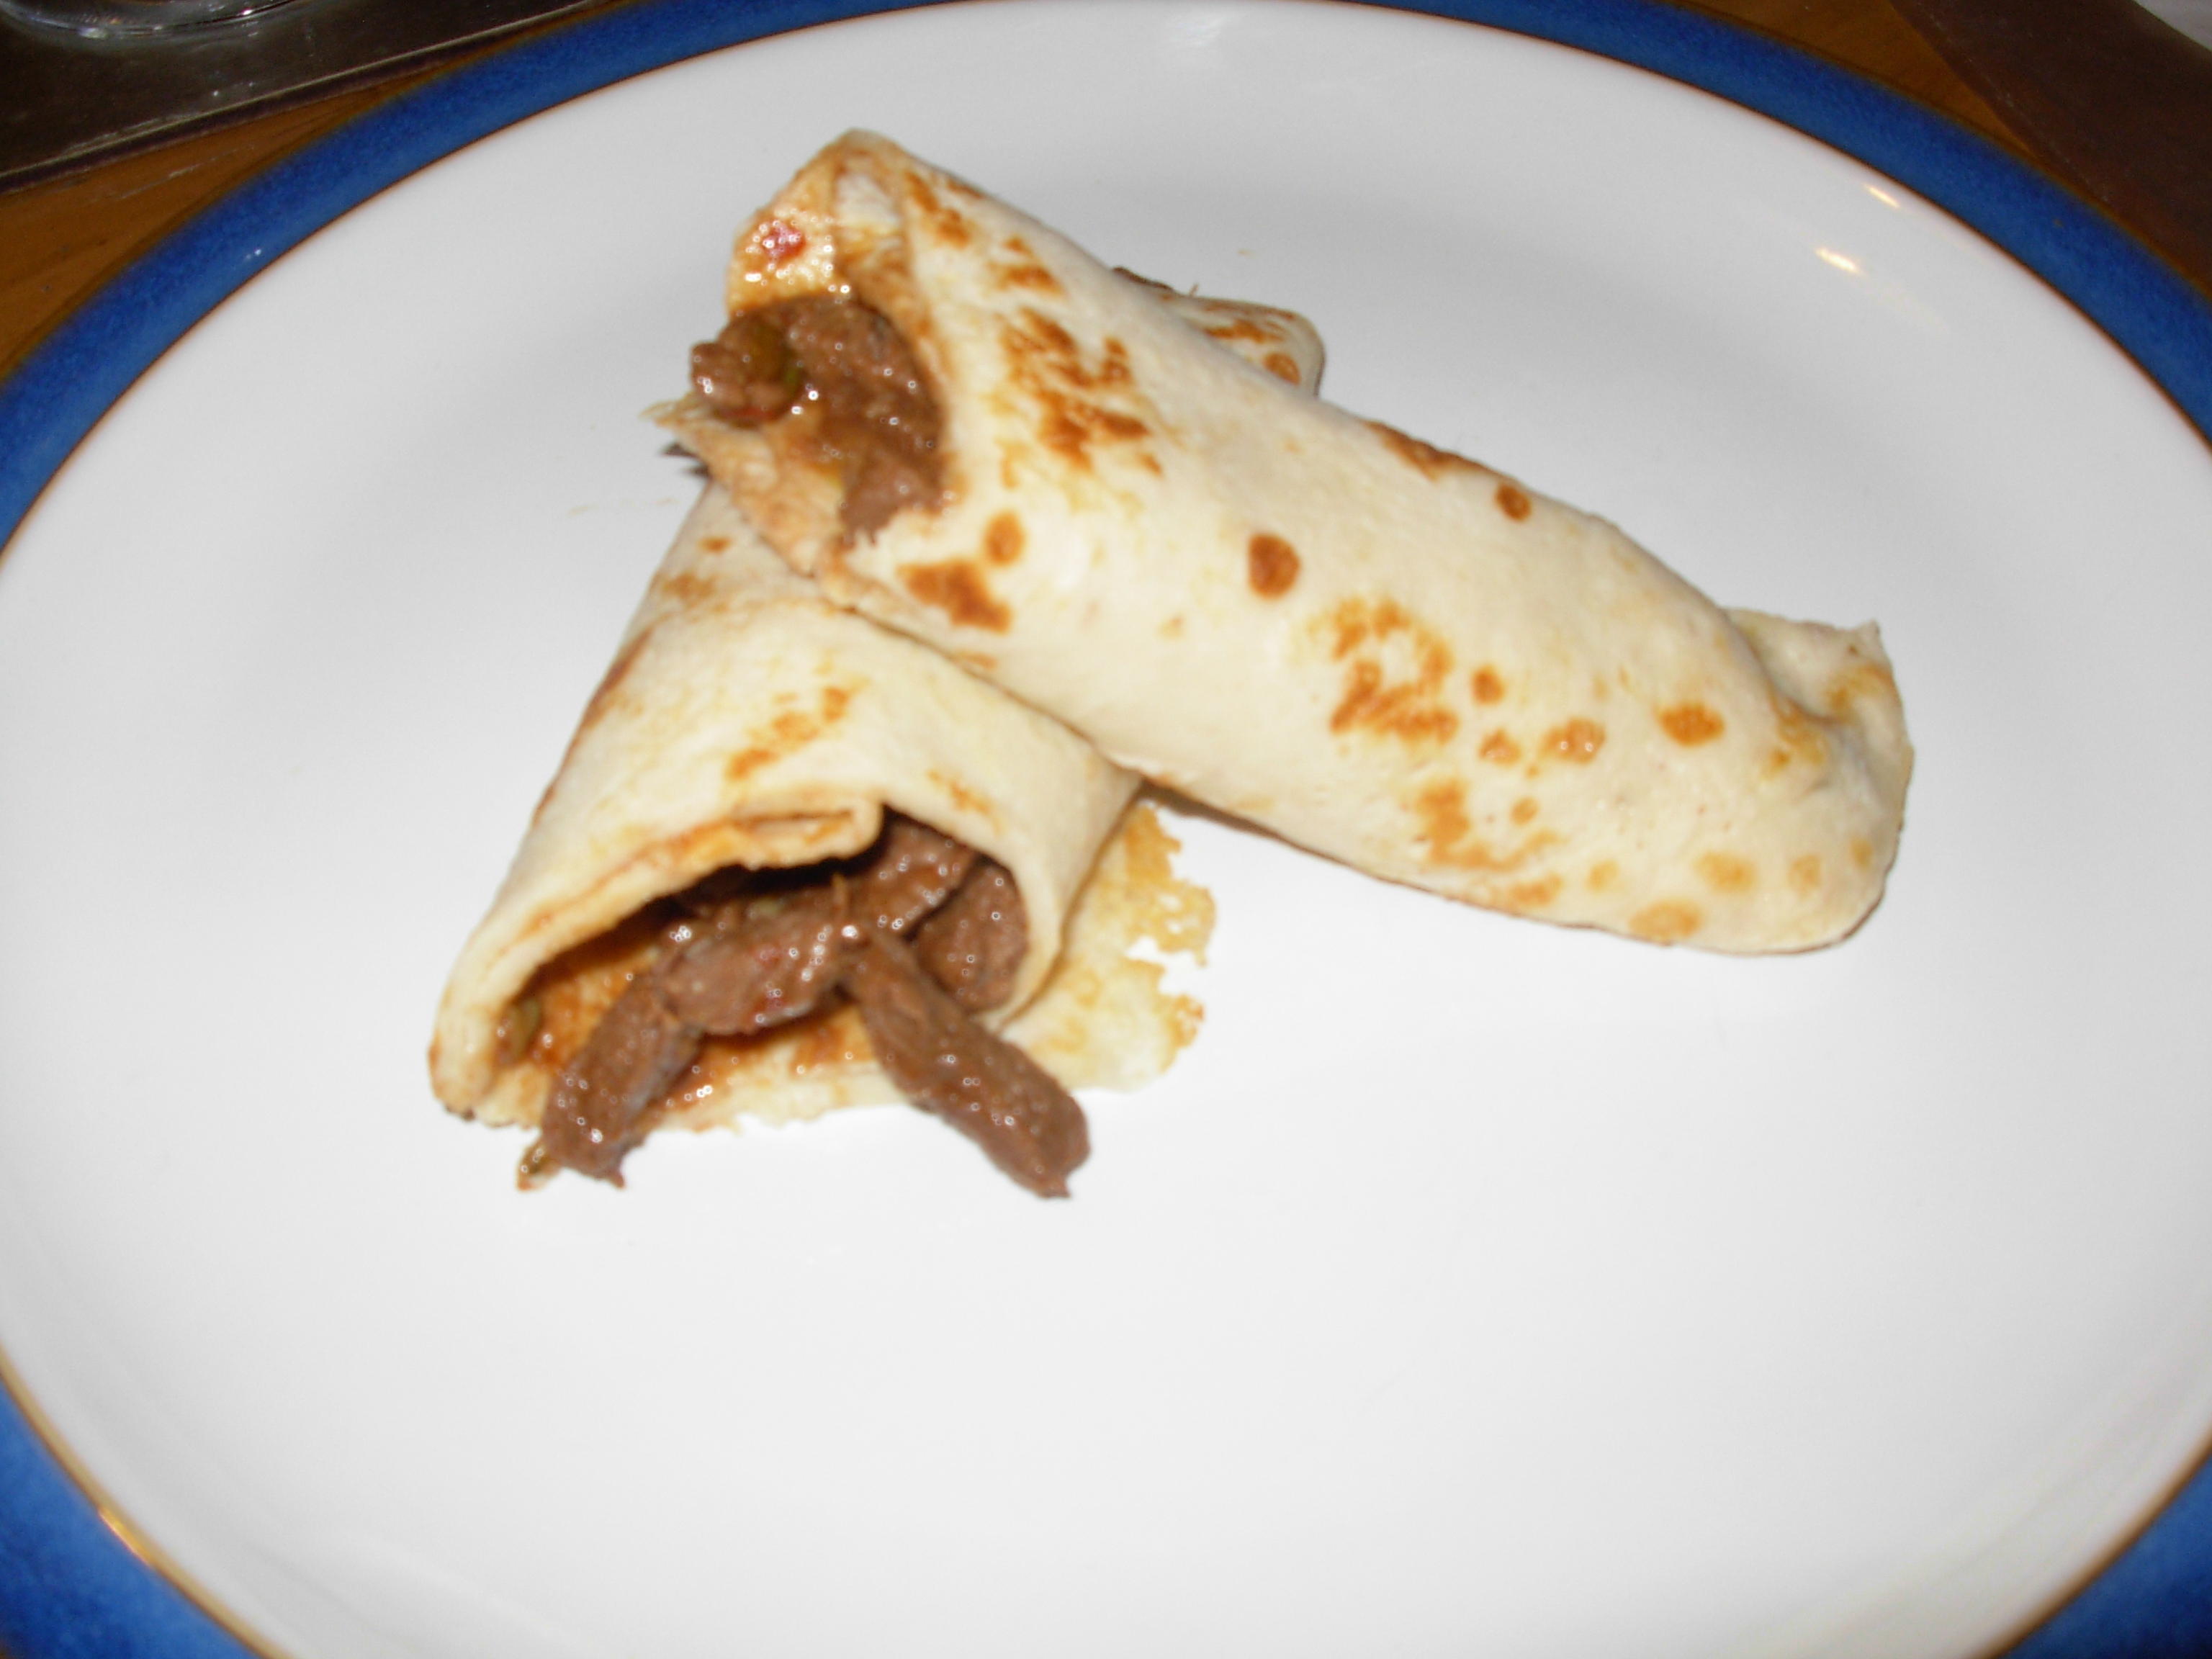 rolled pancake cut in half to show chilli beef filling inside